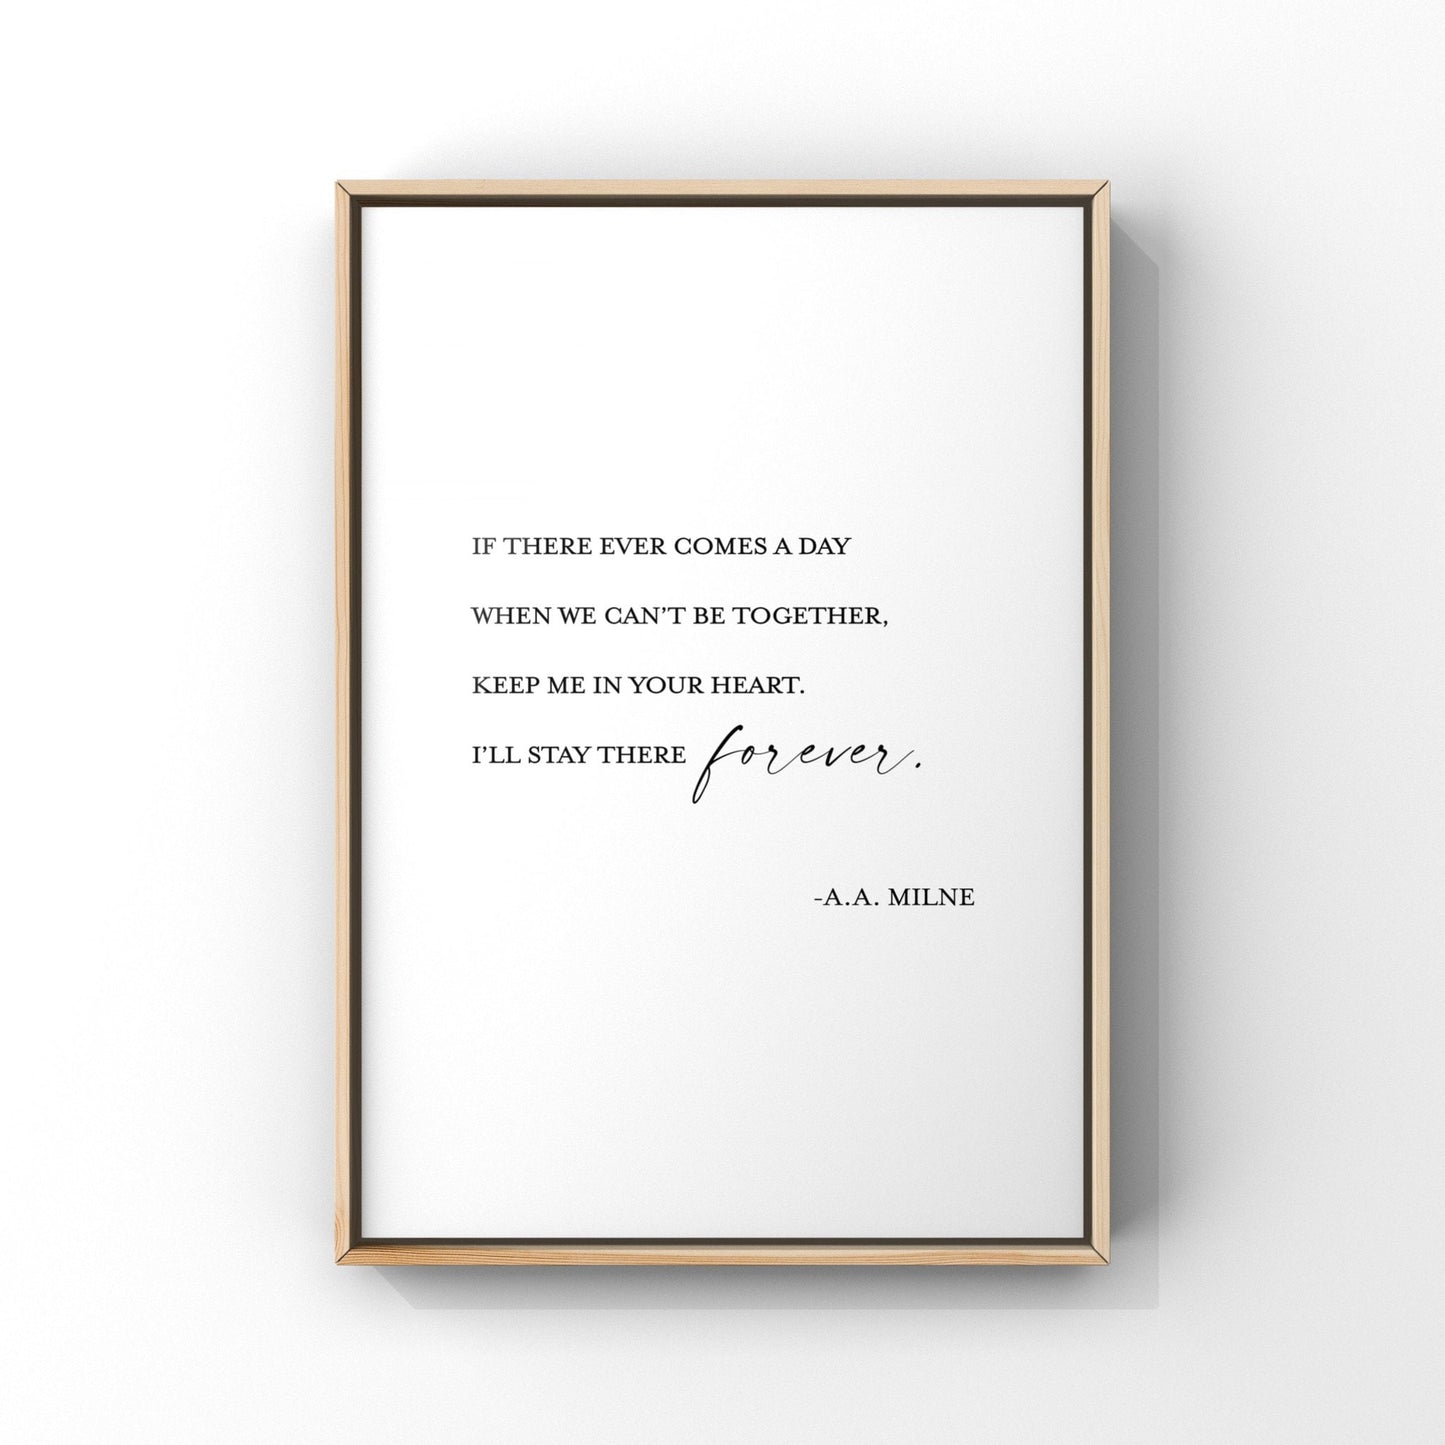 If there ever comes a day when we can’t be together,Keep me in your heart,AA Milne print,Nursery decor,Nursery quote,Winnie the Pooh